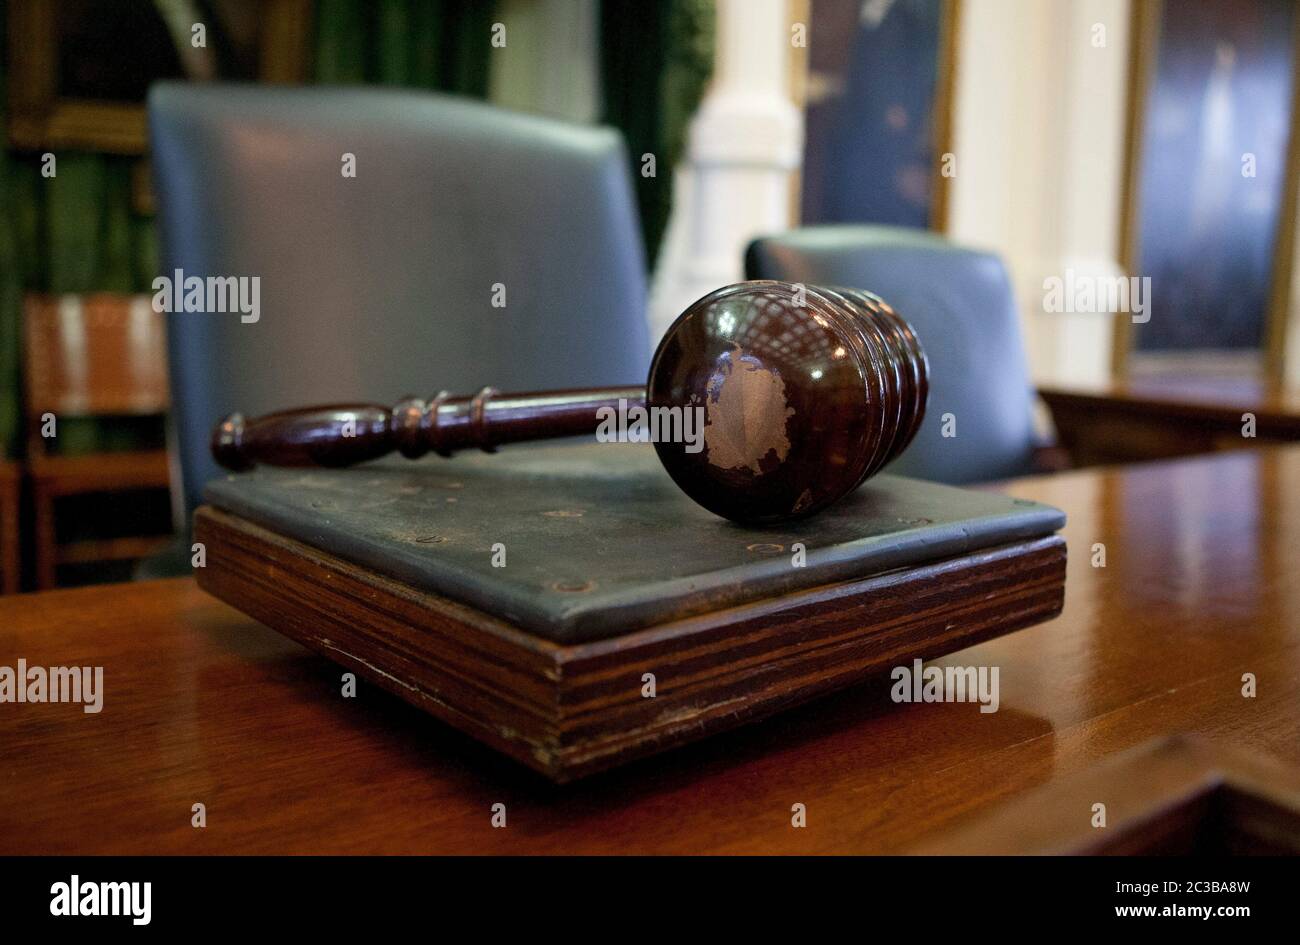 Worn-out gavel sits on desk of the Texas Lieutenant Governor inside the Texas Capitol building in Austin, Texas  ©Marjorie Kamys Cotera/Daemmrich Photography Stock Photo